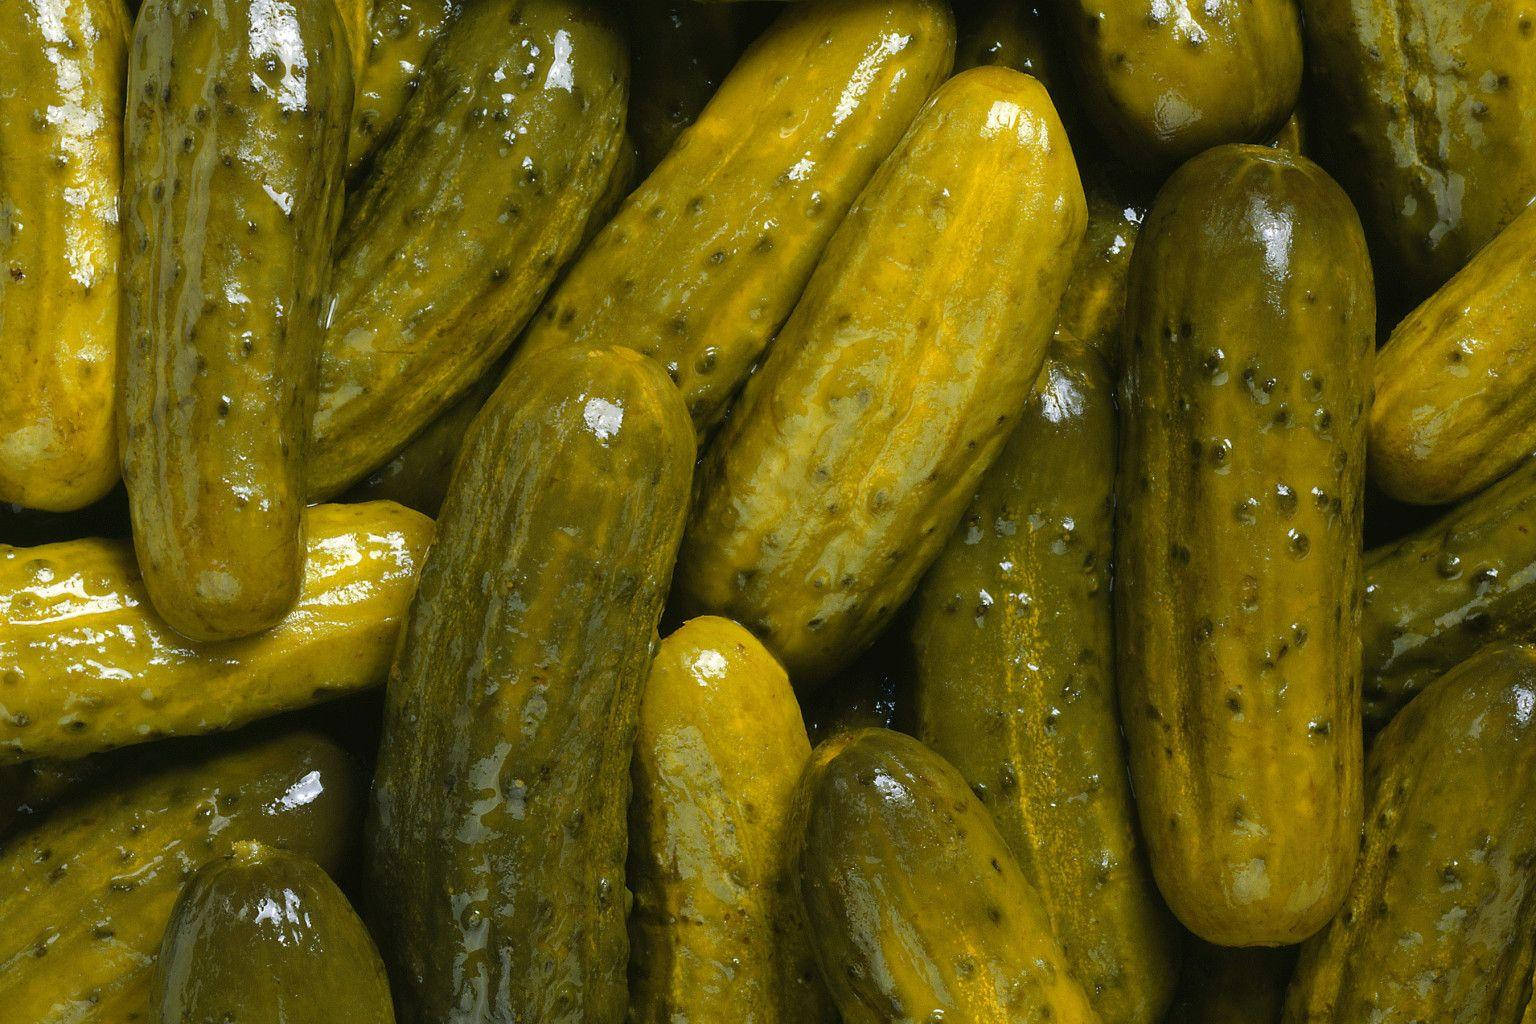 Pickles With Shiny Skin